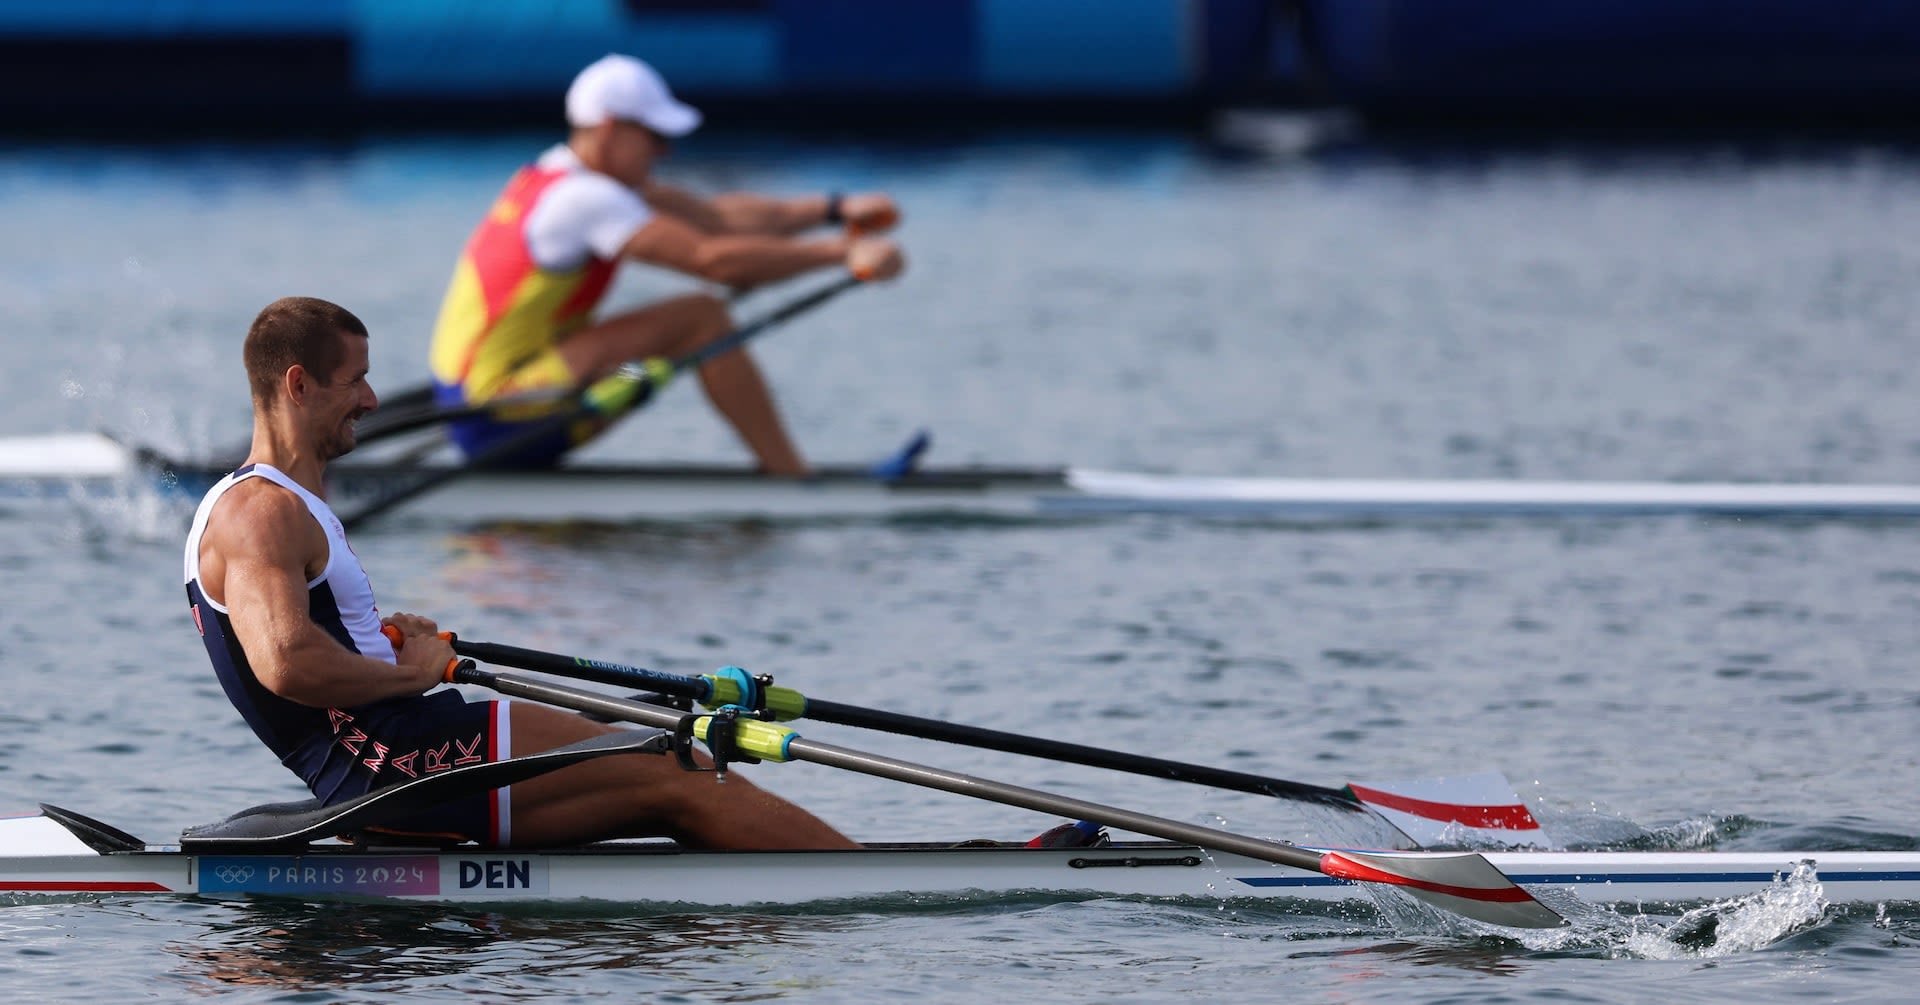 Rowing-Florijn and Zeidler wins single sculls golds, Romania and Britain win eights